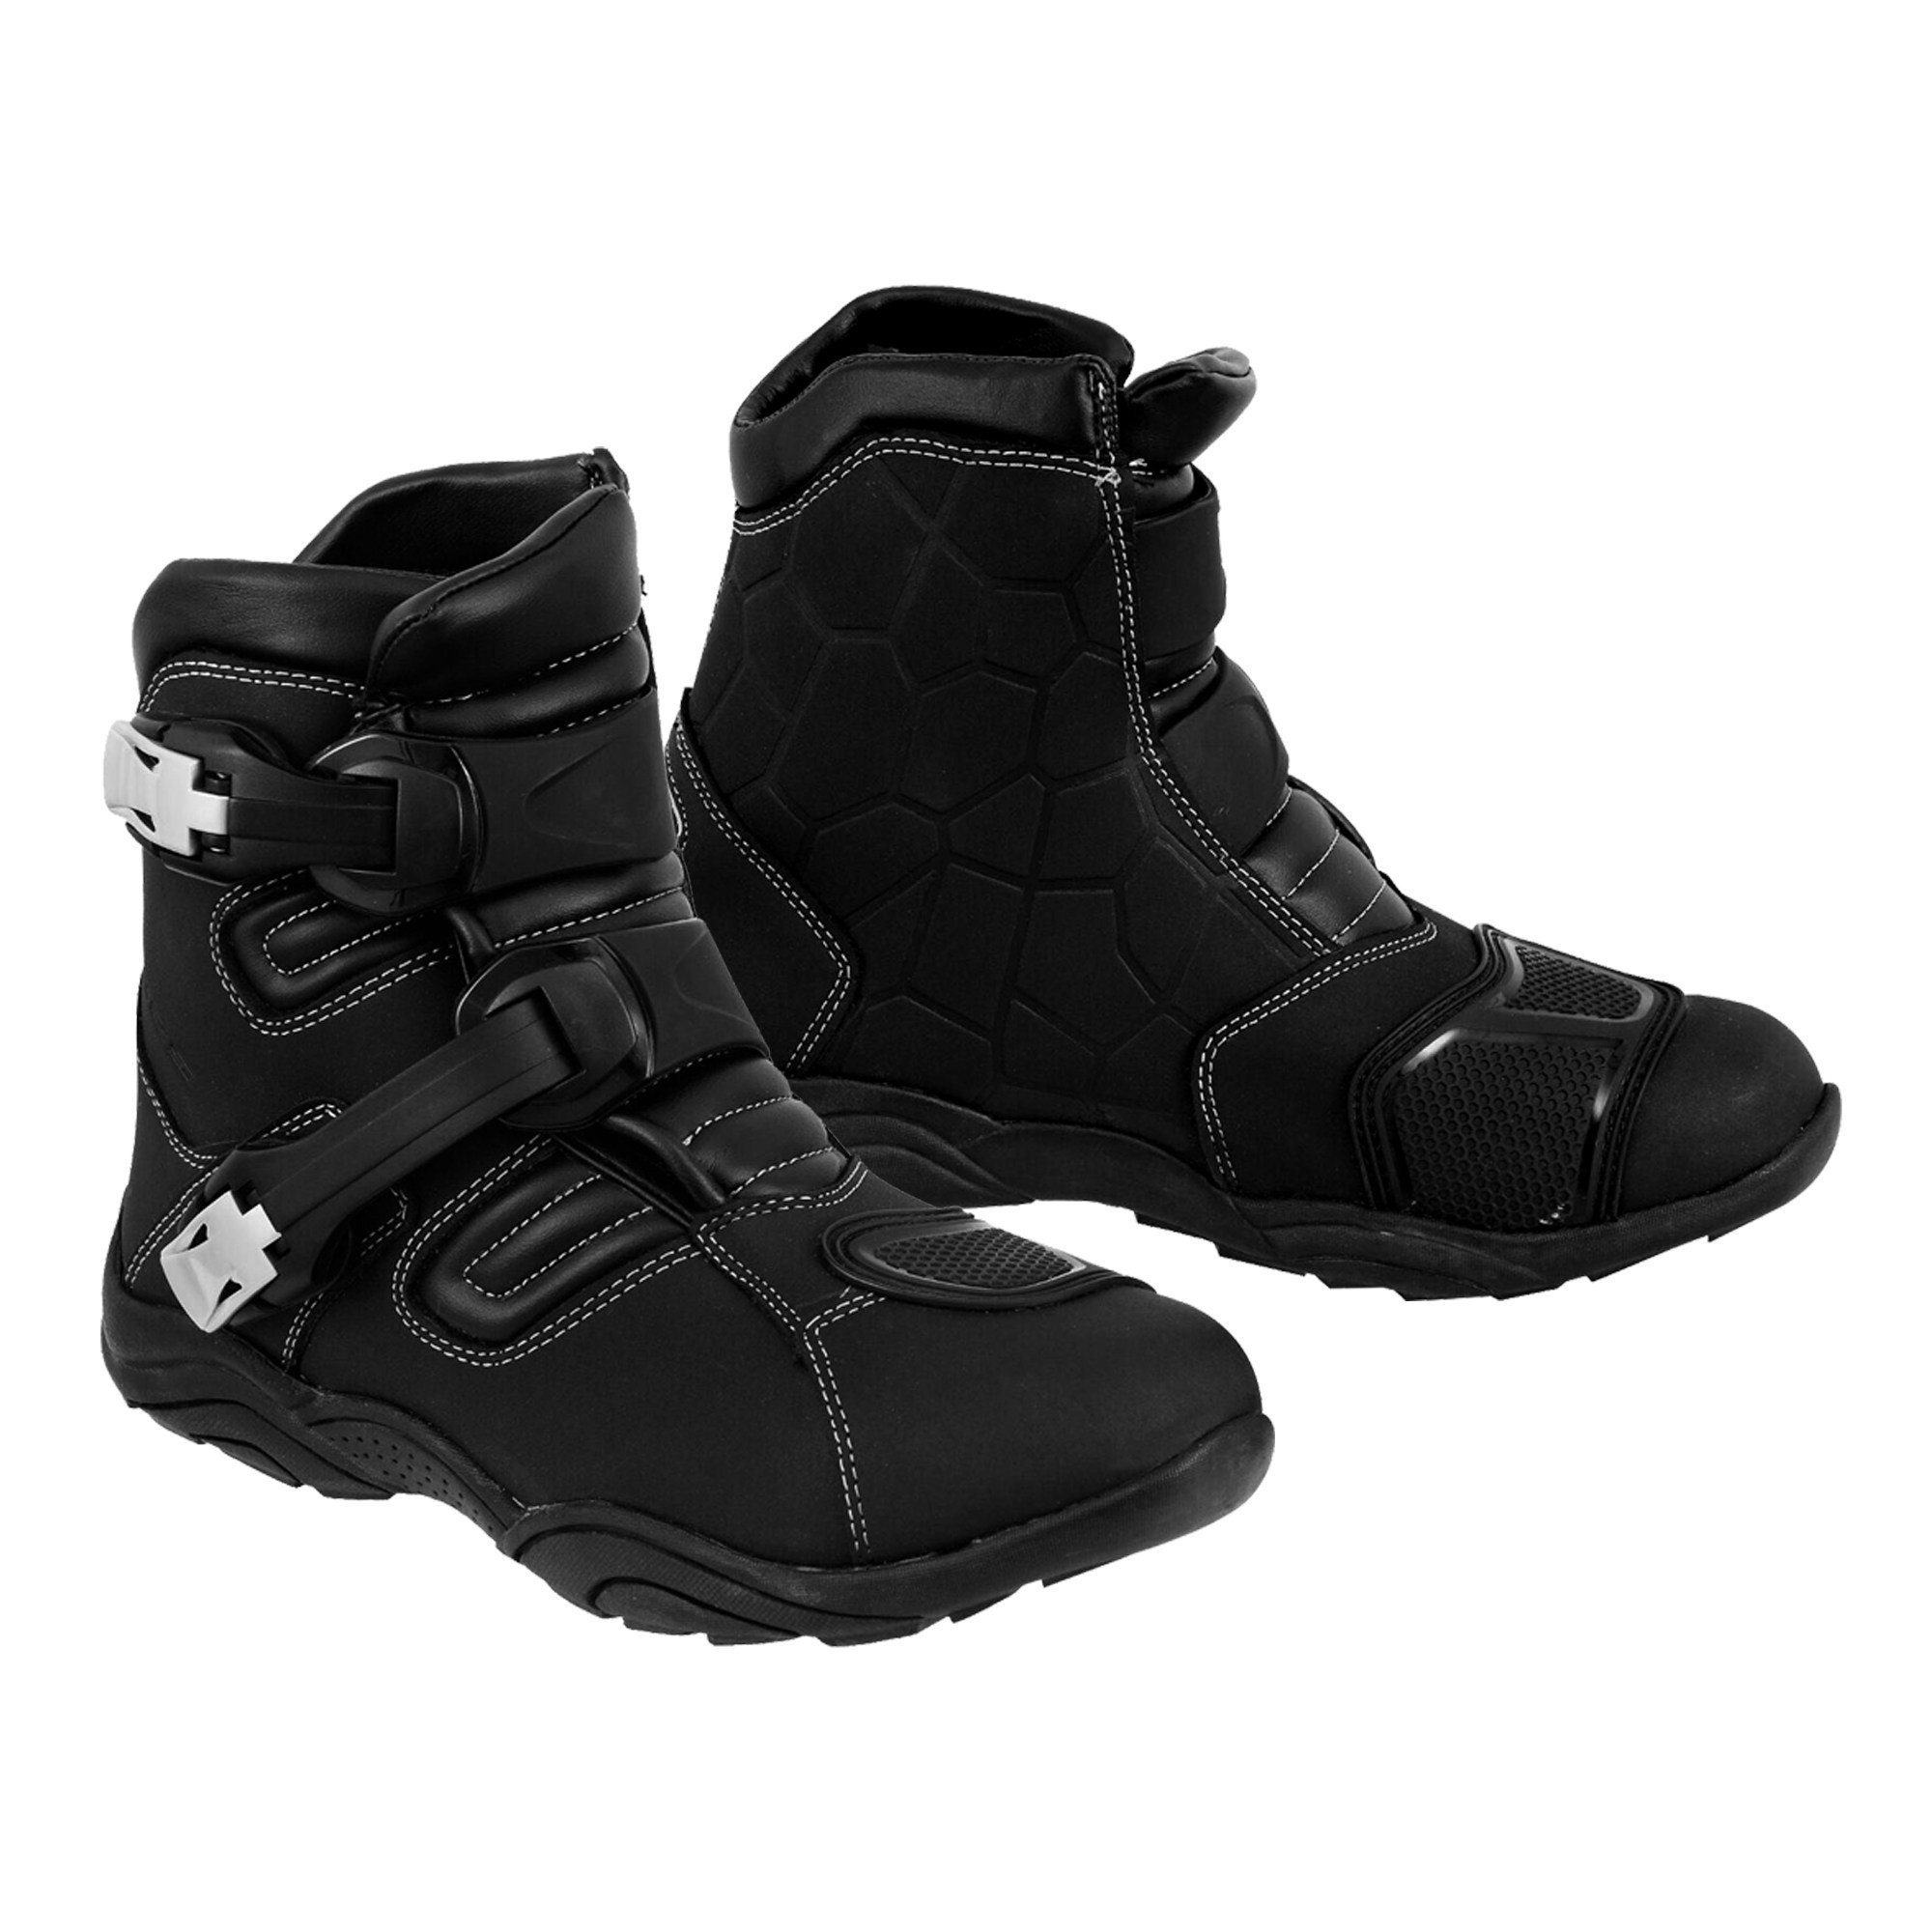 Download Motorbike Racing Gear :: BOOTS :: TOURING BOOTS ...